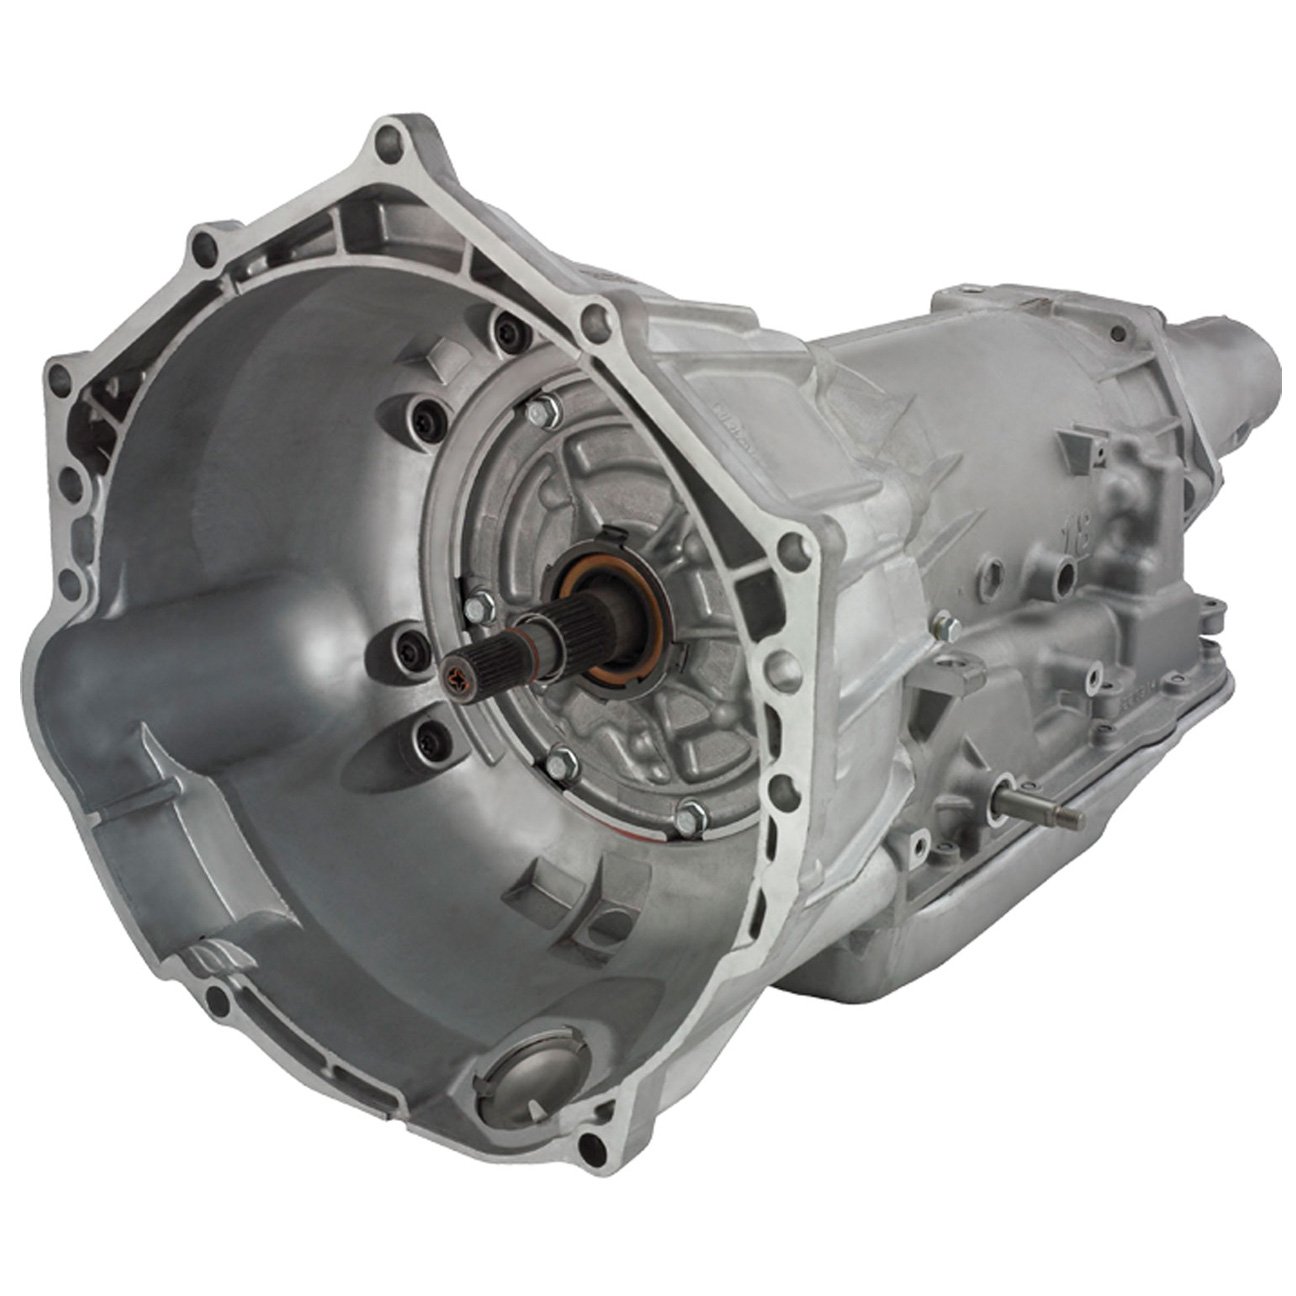 Remanufactured Hydra-Matic 4L65-E Four-Speed Automatic Transmission